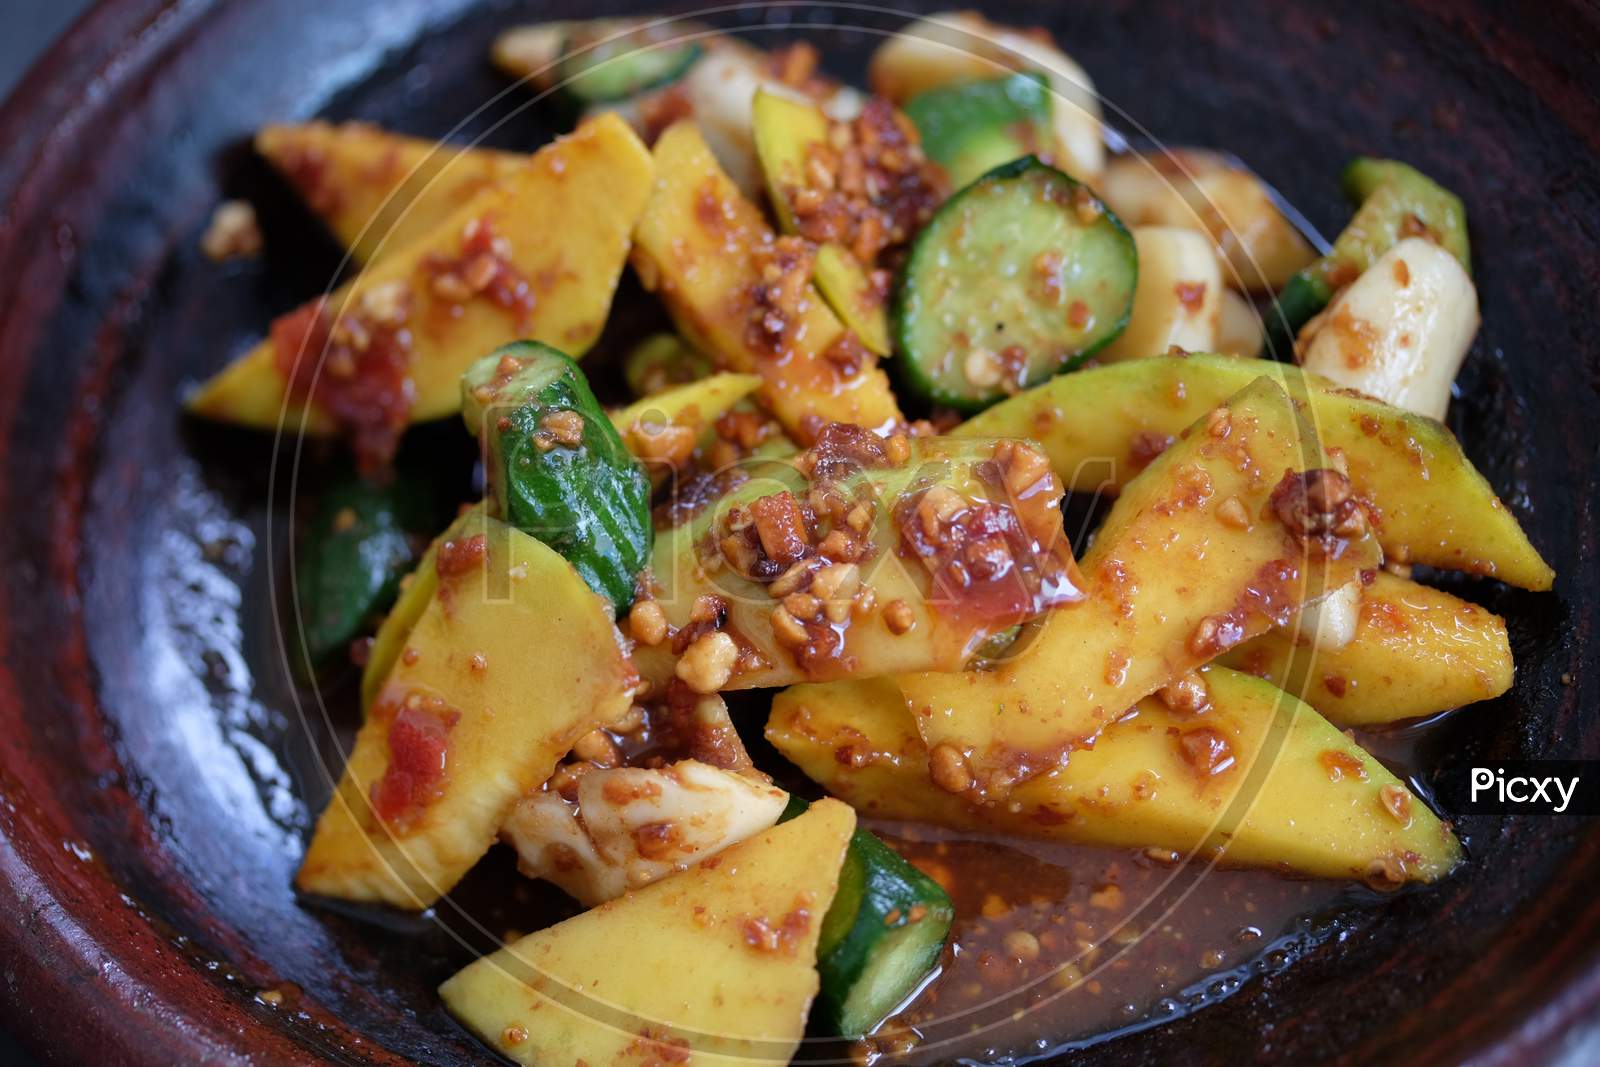 Indonesian fruit salad, a traditional fruit snack tasty and spicy "rujak buah"